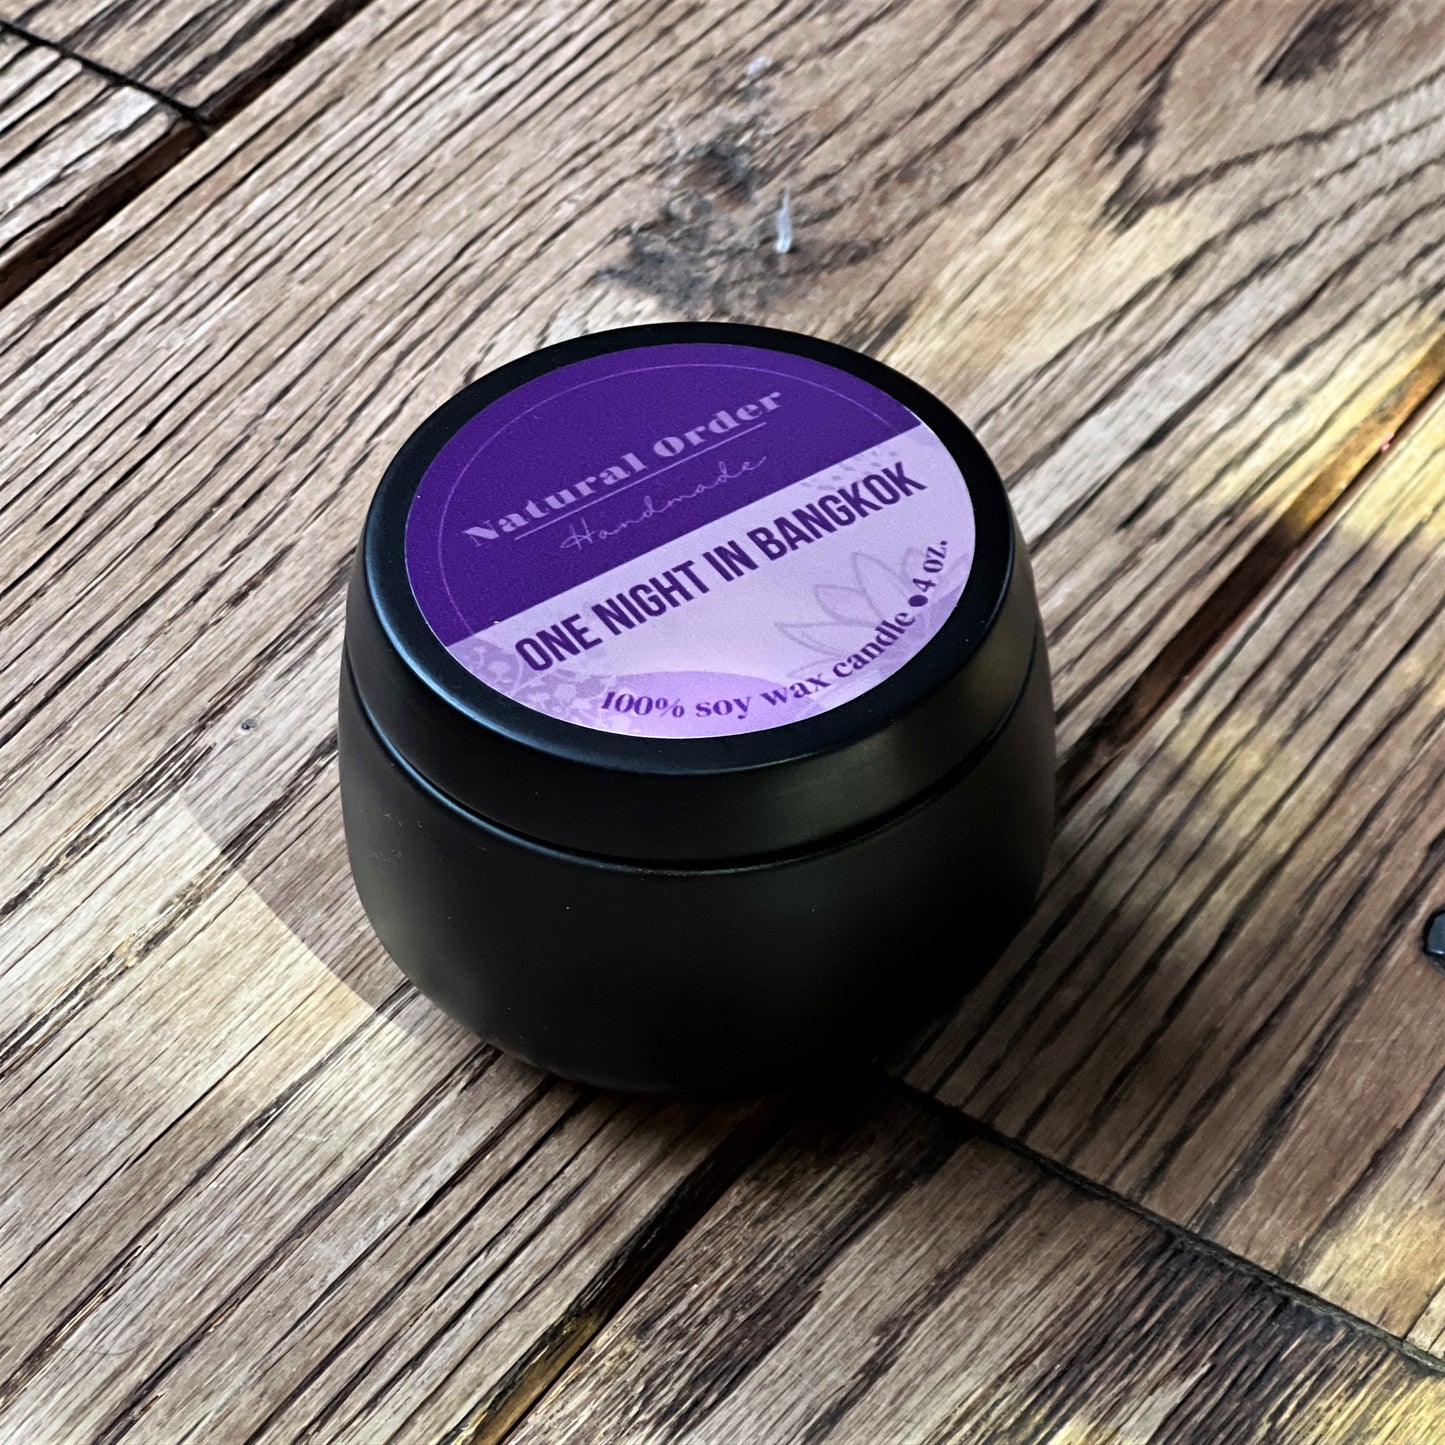 One Night In Bangkok Soy Candle 4 ounce